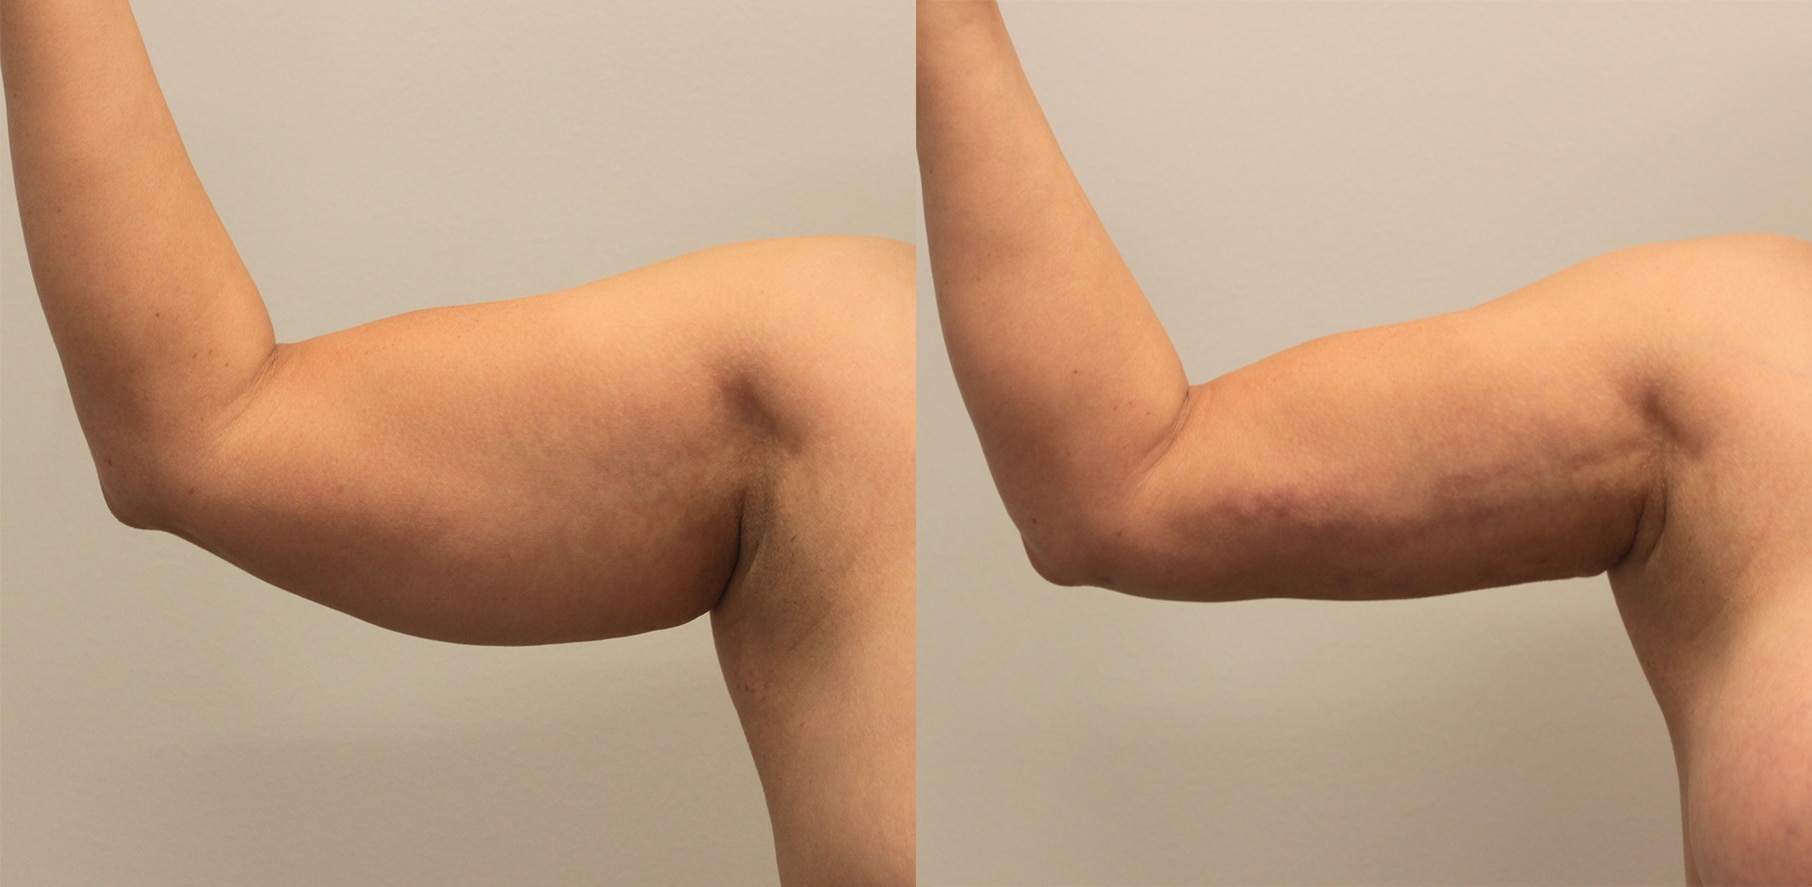 patient's arm before and and after bodytite skin tightening, less fat after procedure